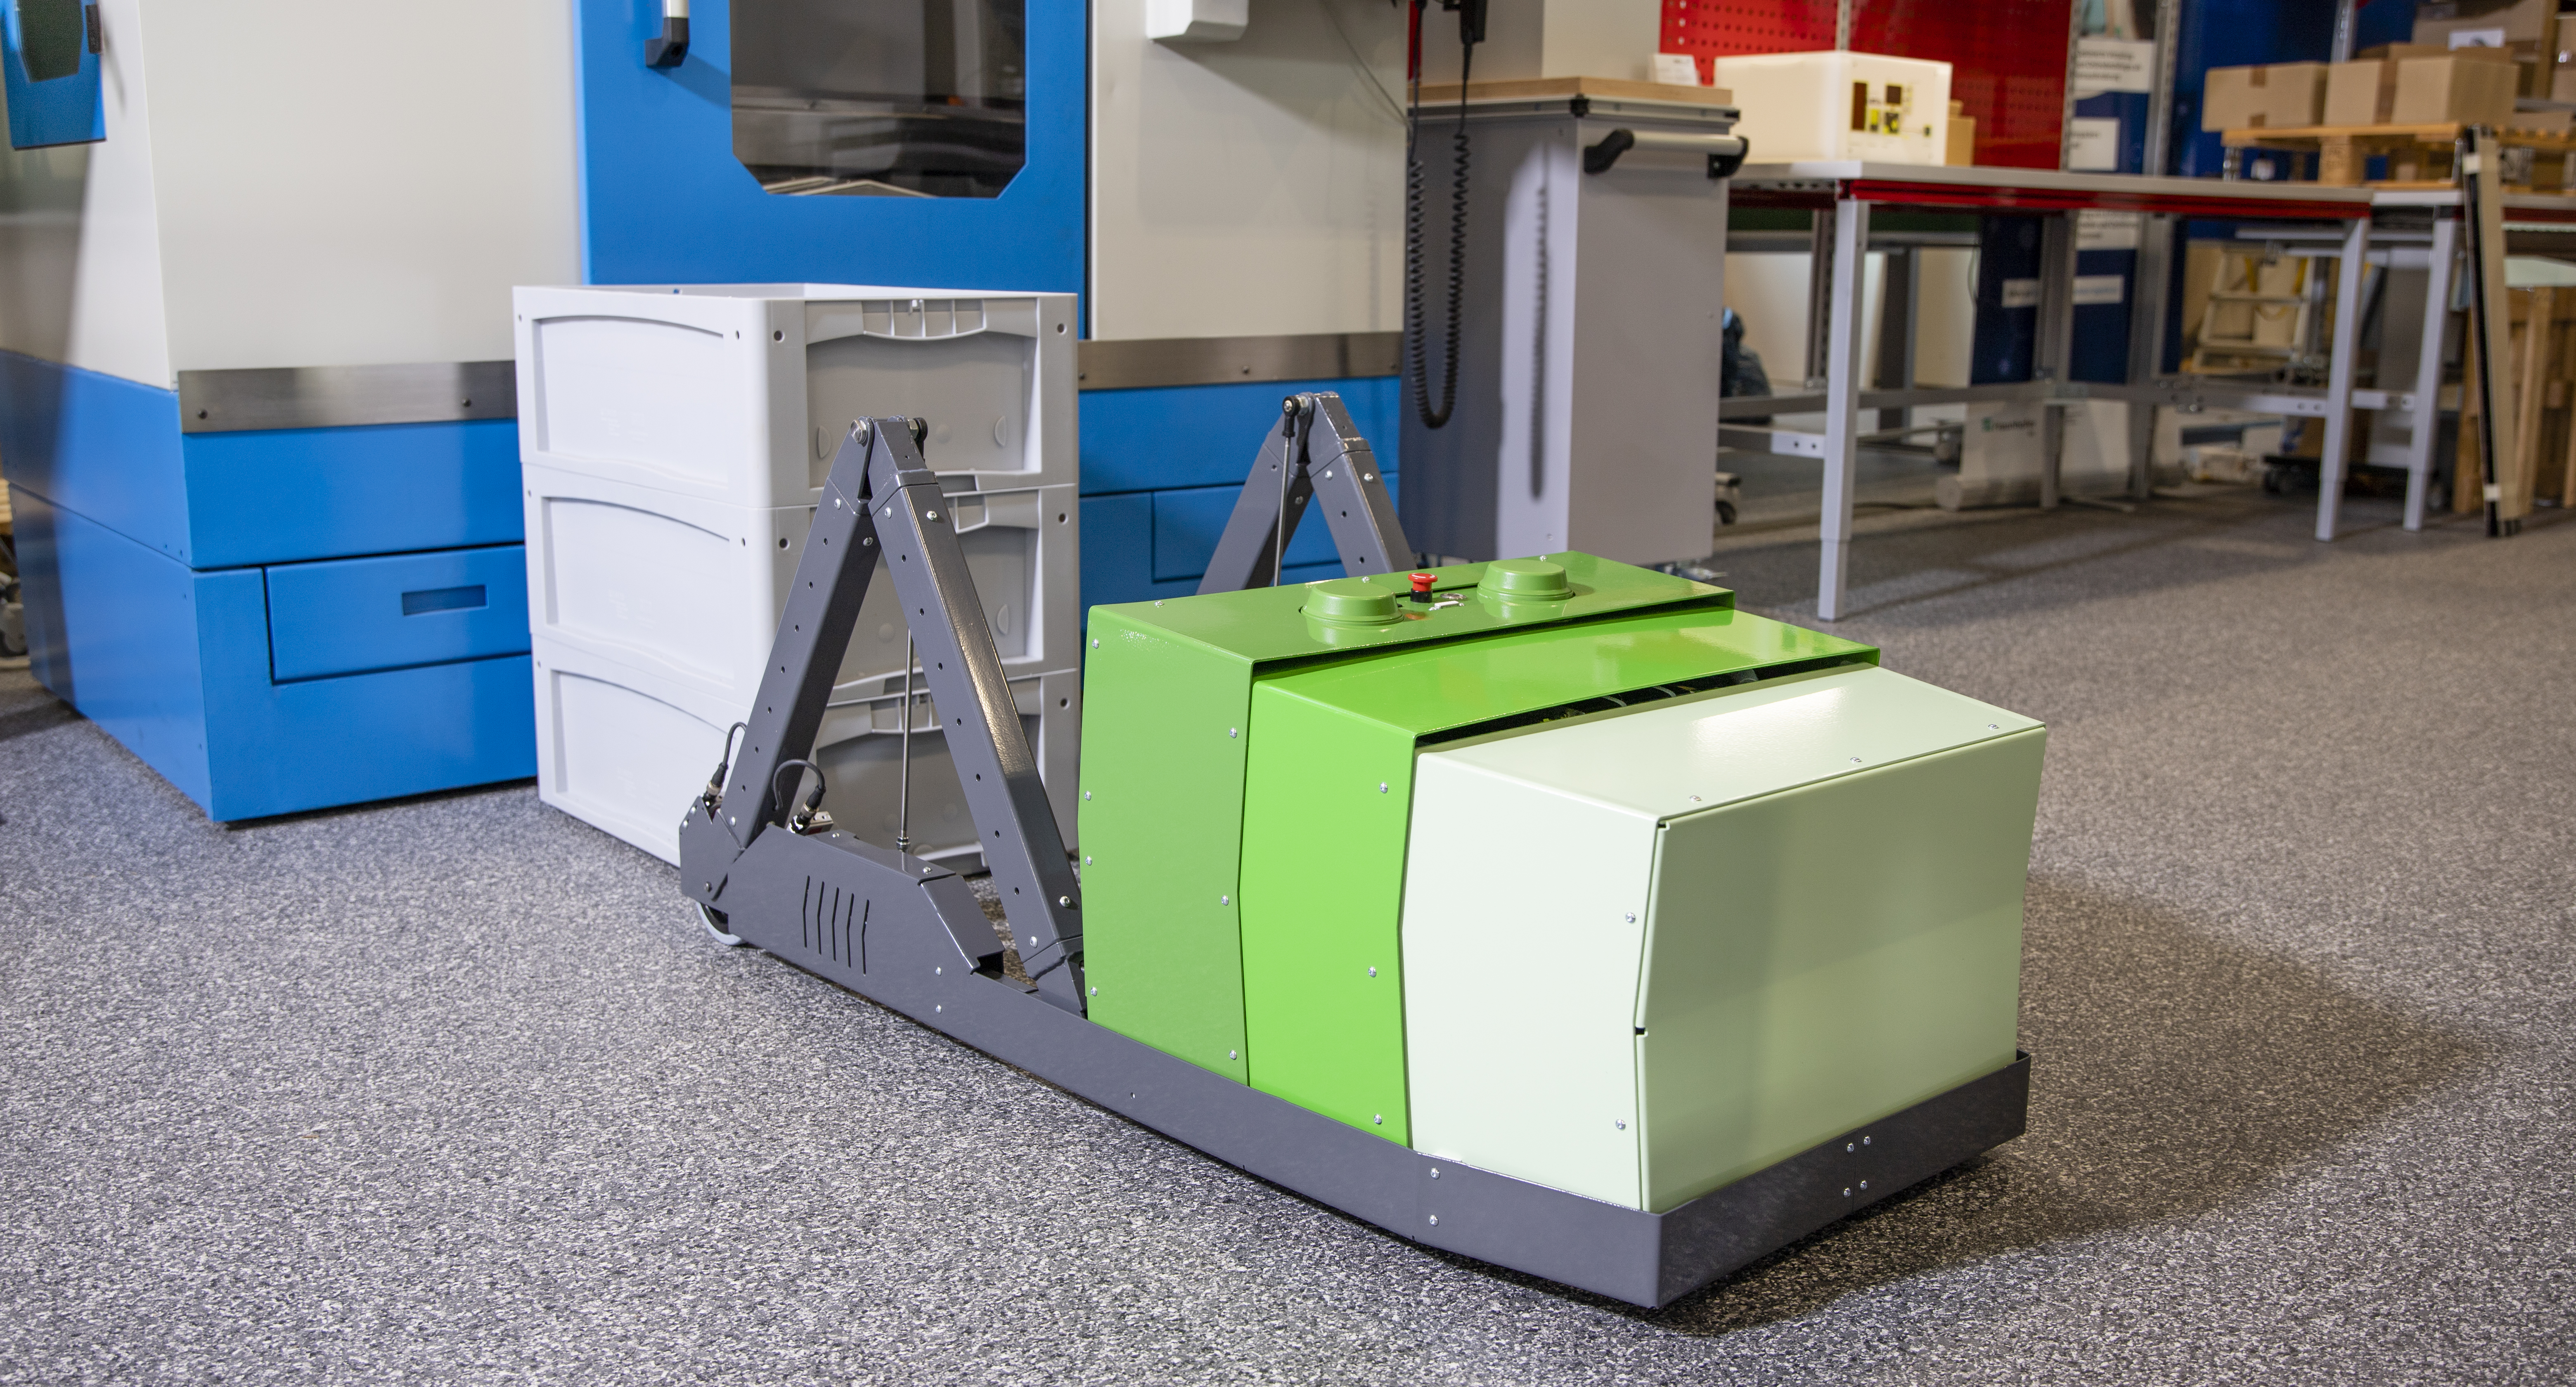 Flexible Lifter for Intralogistics and Production« (short FLIP®) is a small AGV for transporting bins in an infrastructure-reduced environment